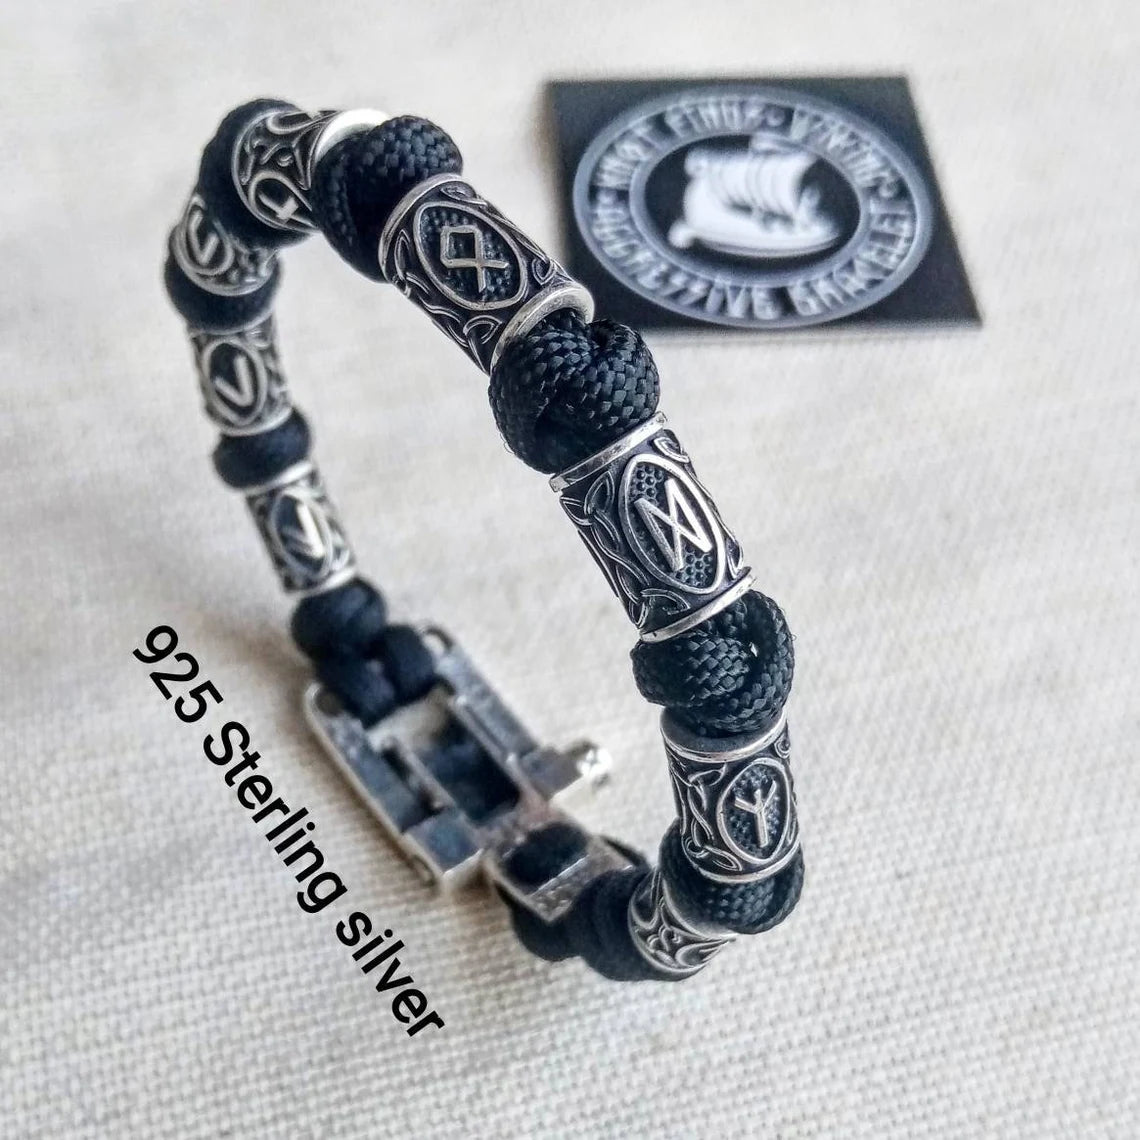 Runic paracord and 925 Sterling silver bracelet "VIKING". Nordic bracelet with runes beads.